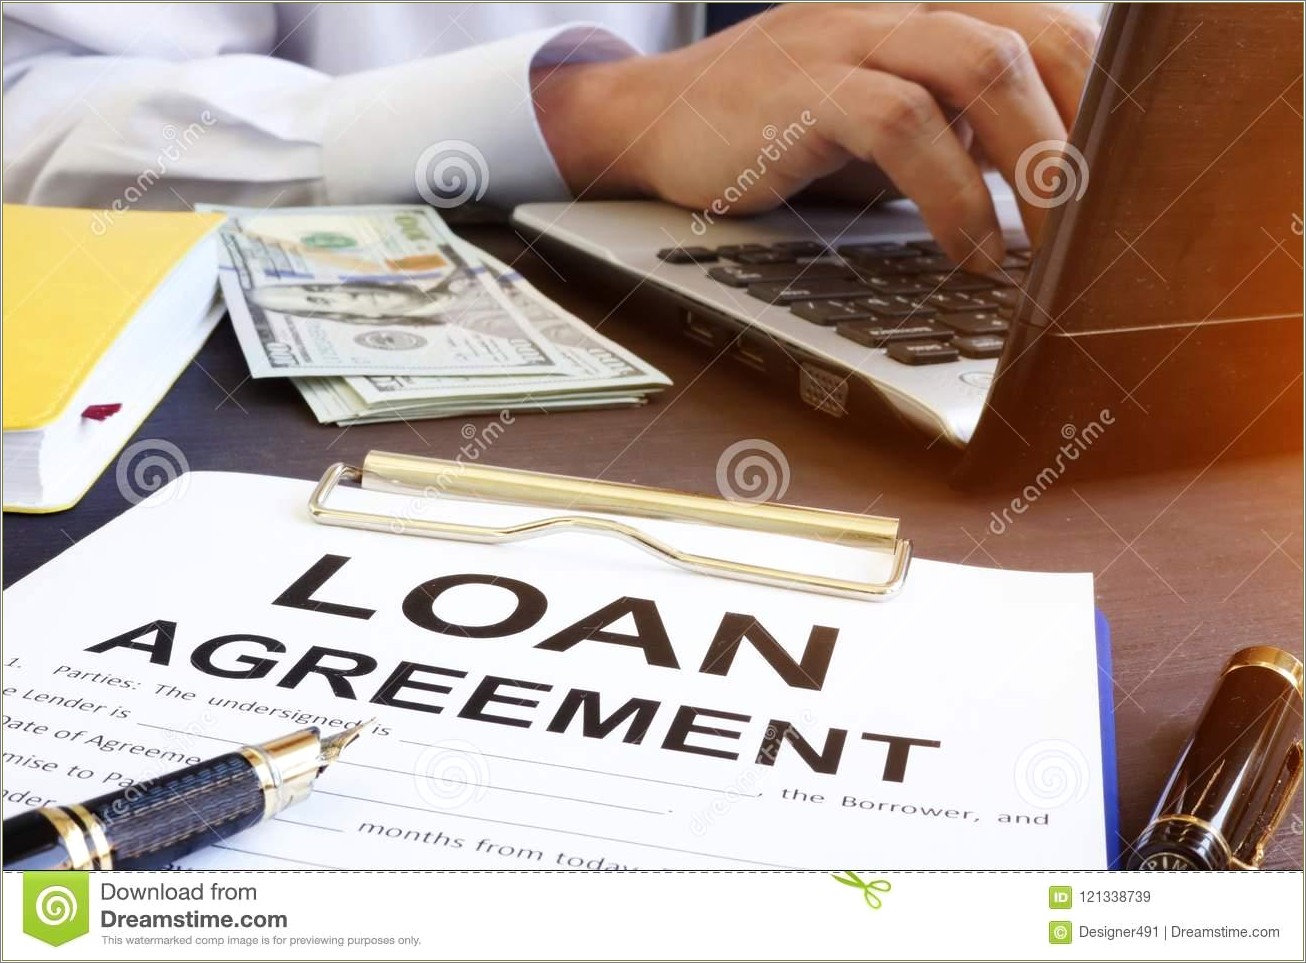 Free Contract Templates For Lending Money